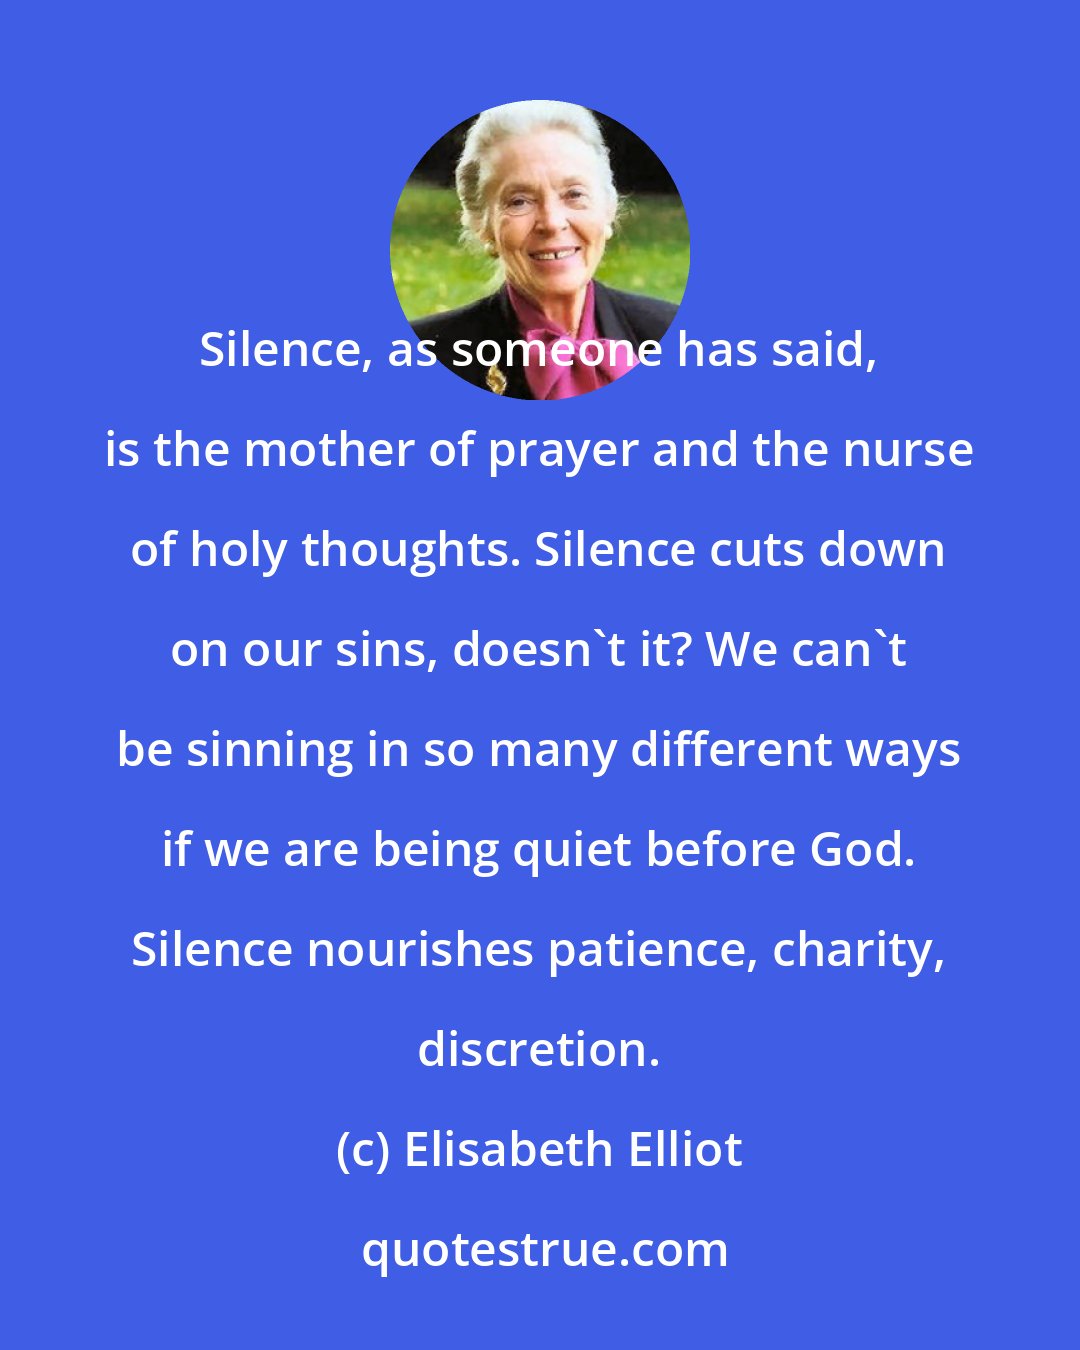 Elisabeth Elliot: Silence, as someone has said, is the mother of prayer and the nurse of holy thoughts. Silence cuts down on our sins, doesn't it? We can't be sinning in so many different ways if we are being quiet before God. Silence nourishes patience, charity, discretion.